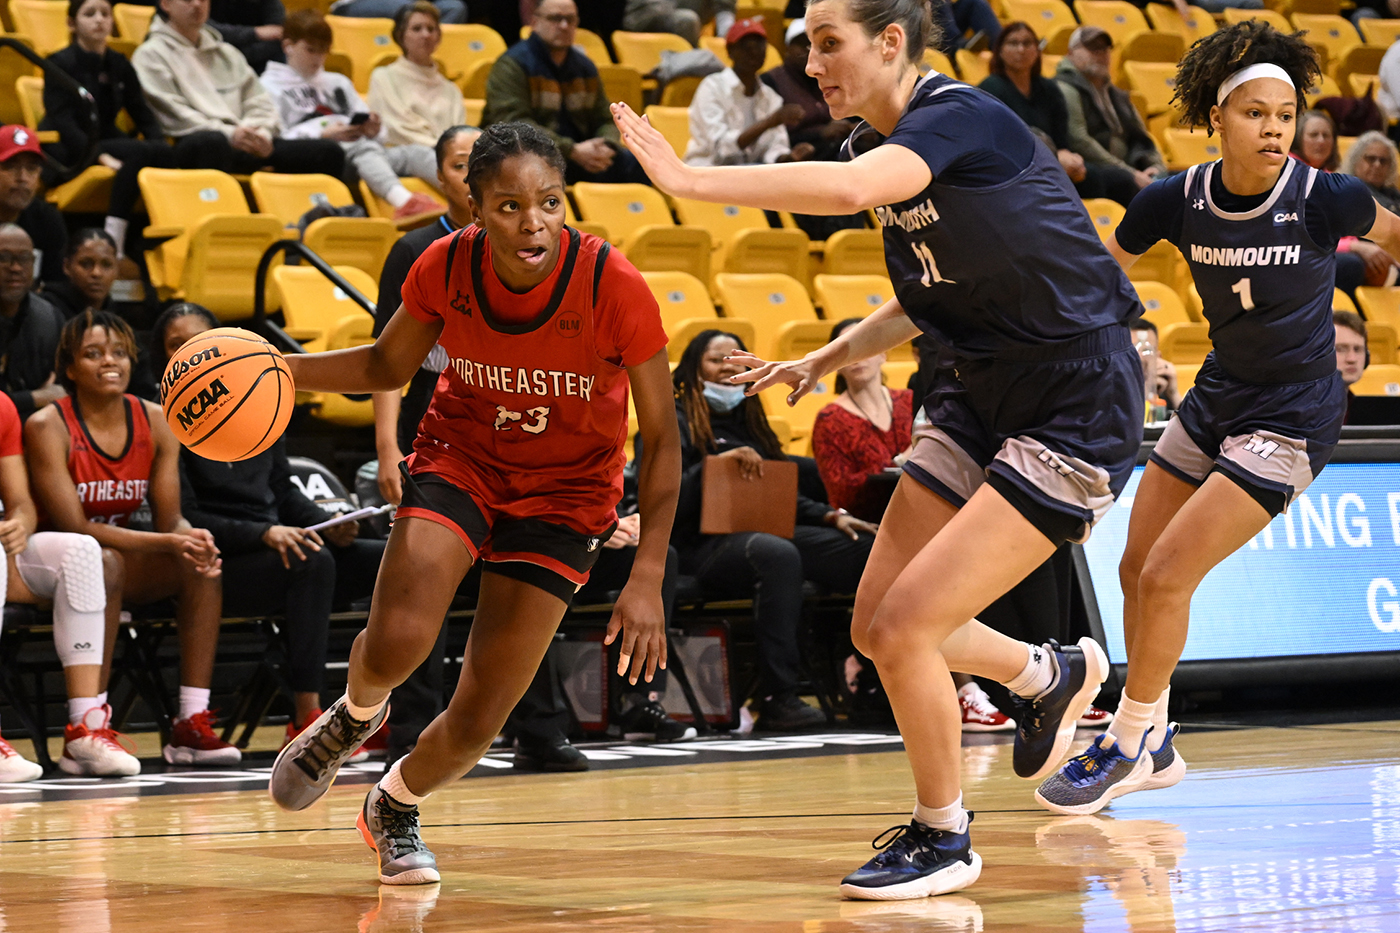 northeastern womens basketball player dribbles past monmouth player